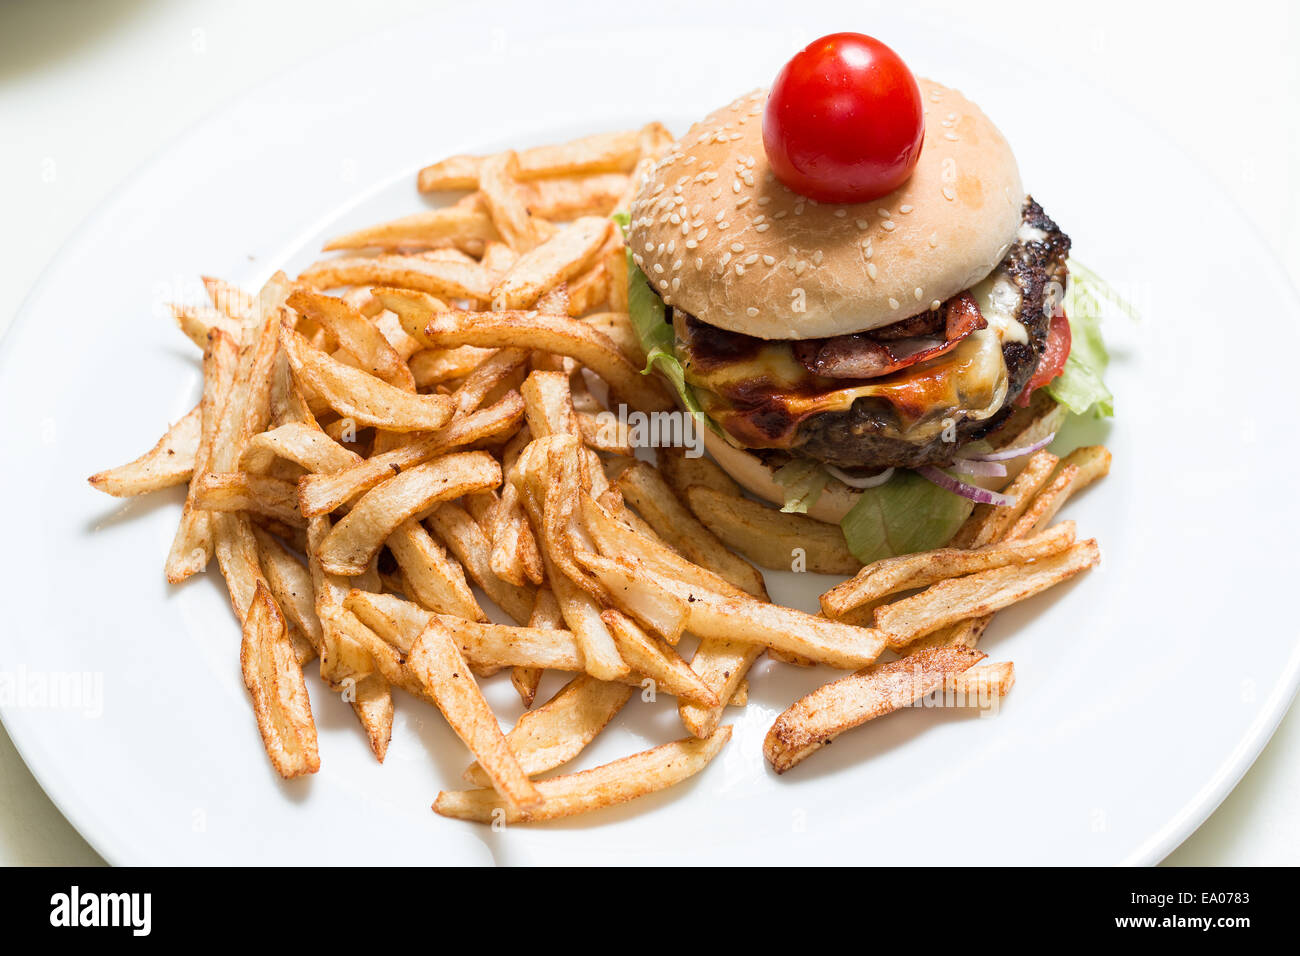 Burger and french fries on a white plate Stock Photo